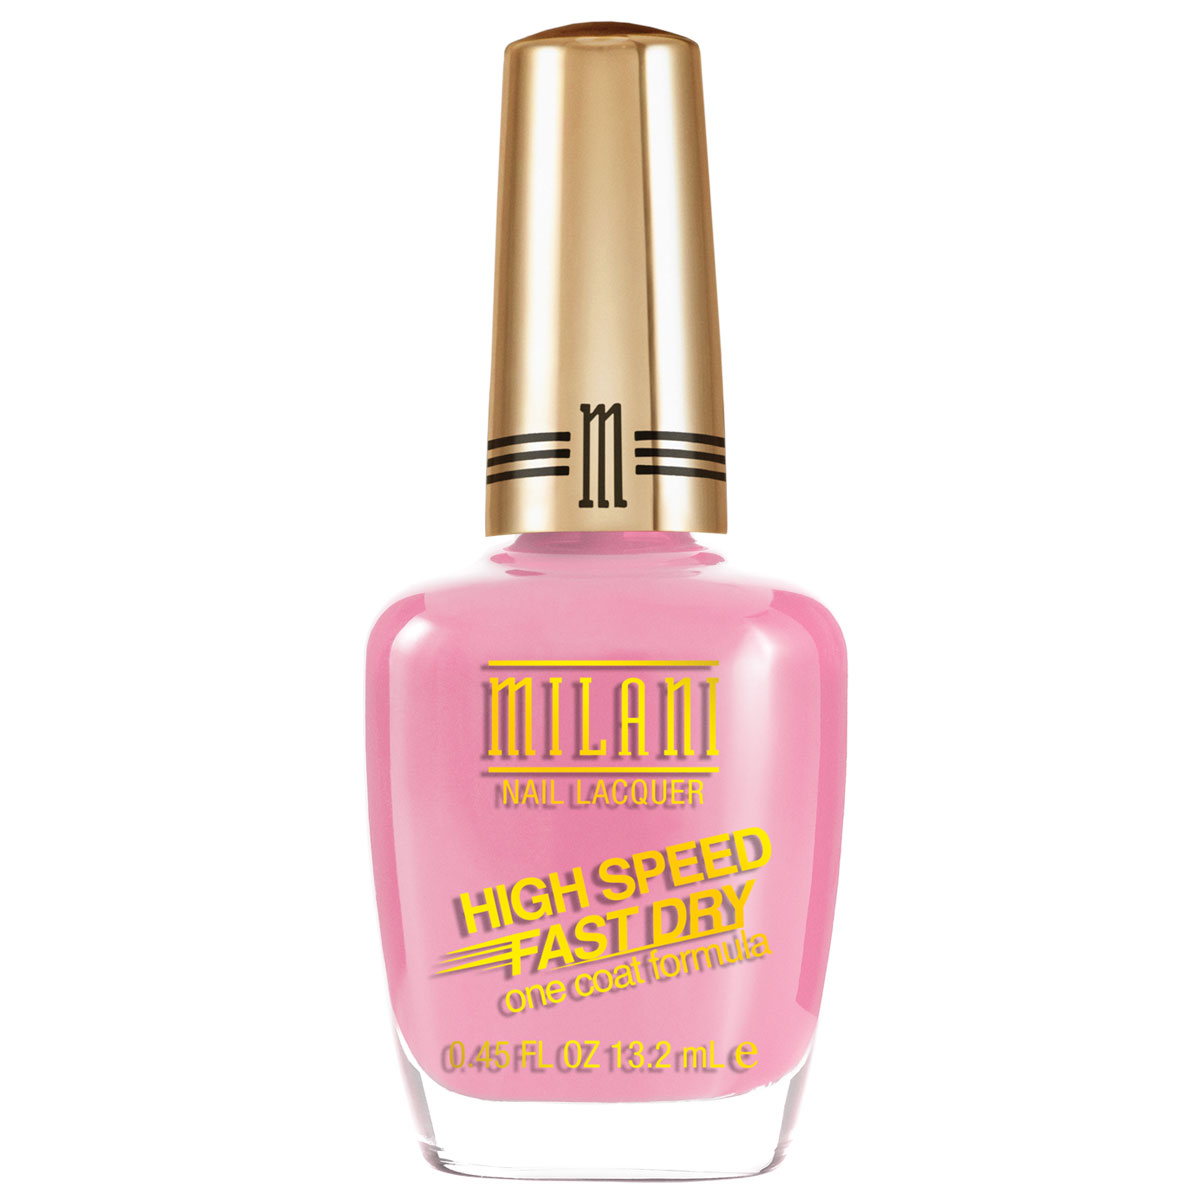 Milani High Speed Fast Dry Nail Lacquer Pink Express